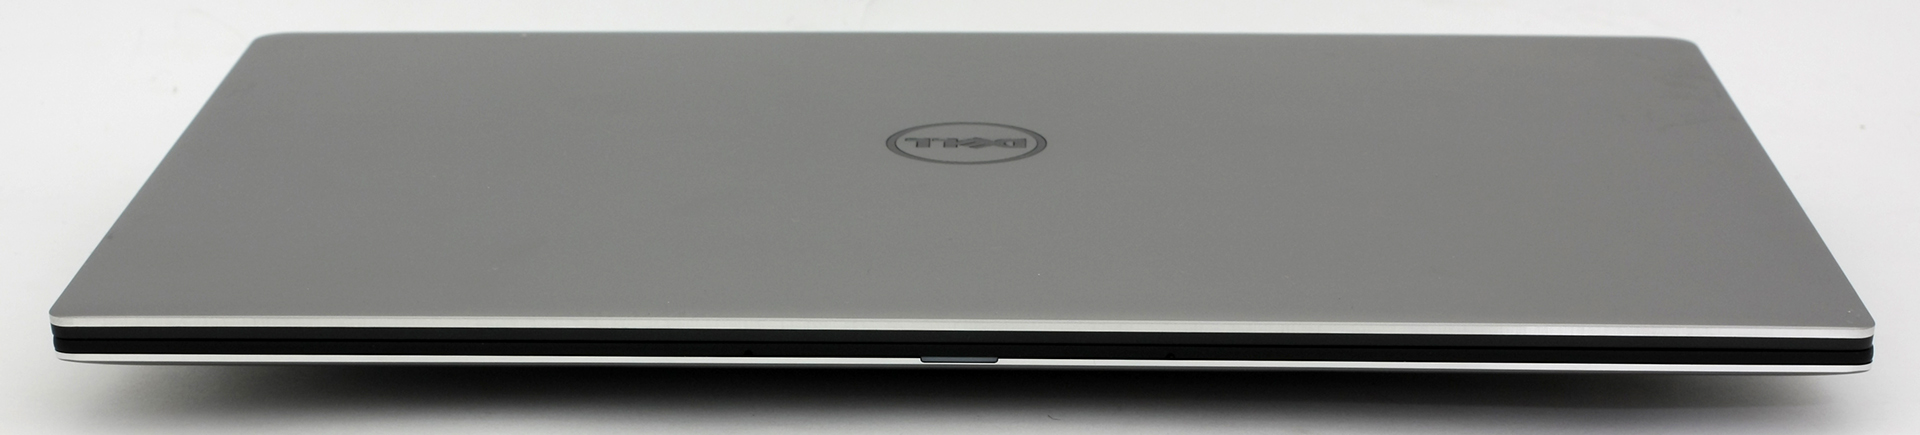 Dell XPS 13 (9350) review - the refreshed XPS 13 doesn't go any further ...